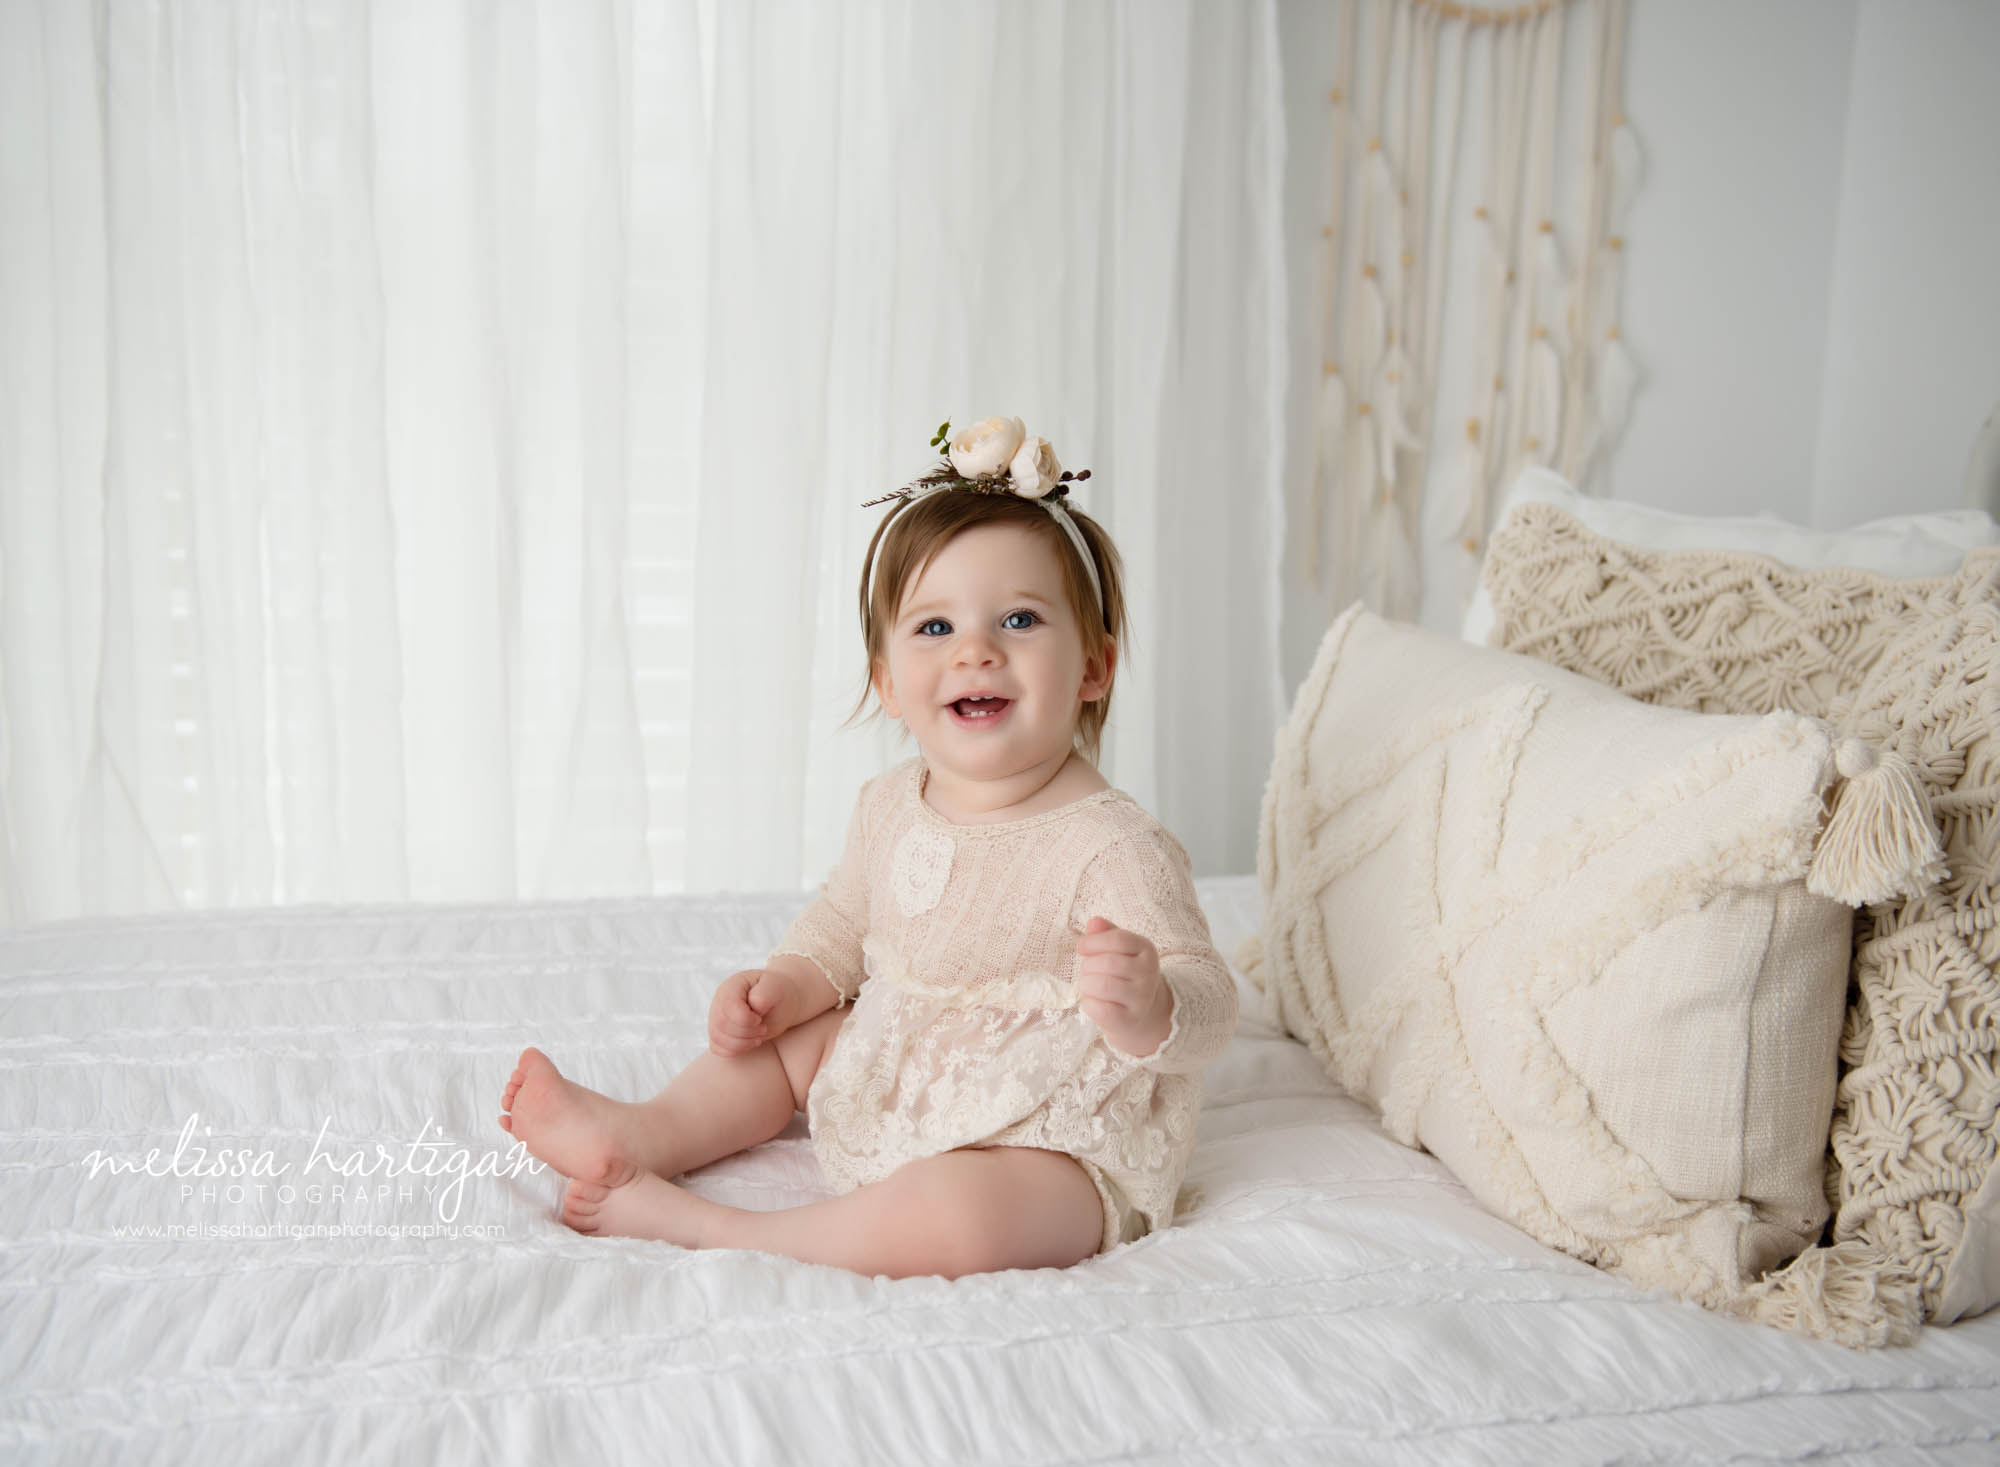 baby girl sitting happy on bed in photography studio during milestone photoshoot